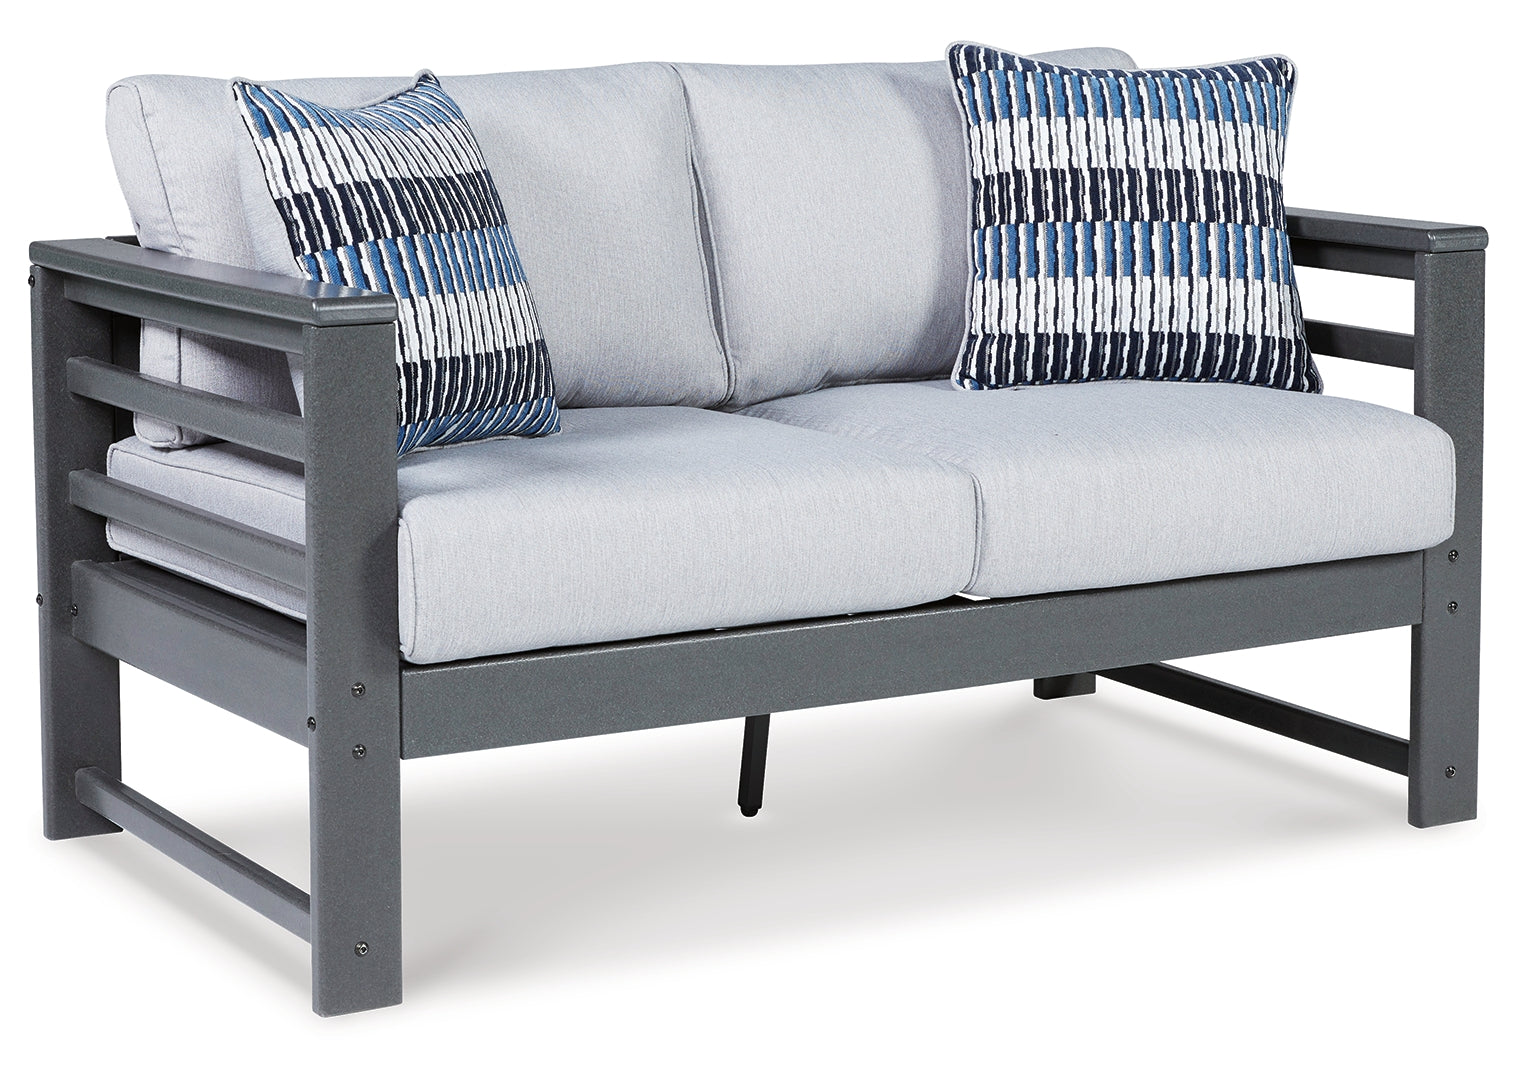 Amora Outdoor Loveseat with Cushion